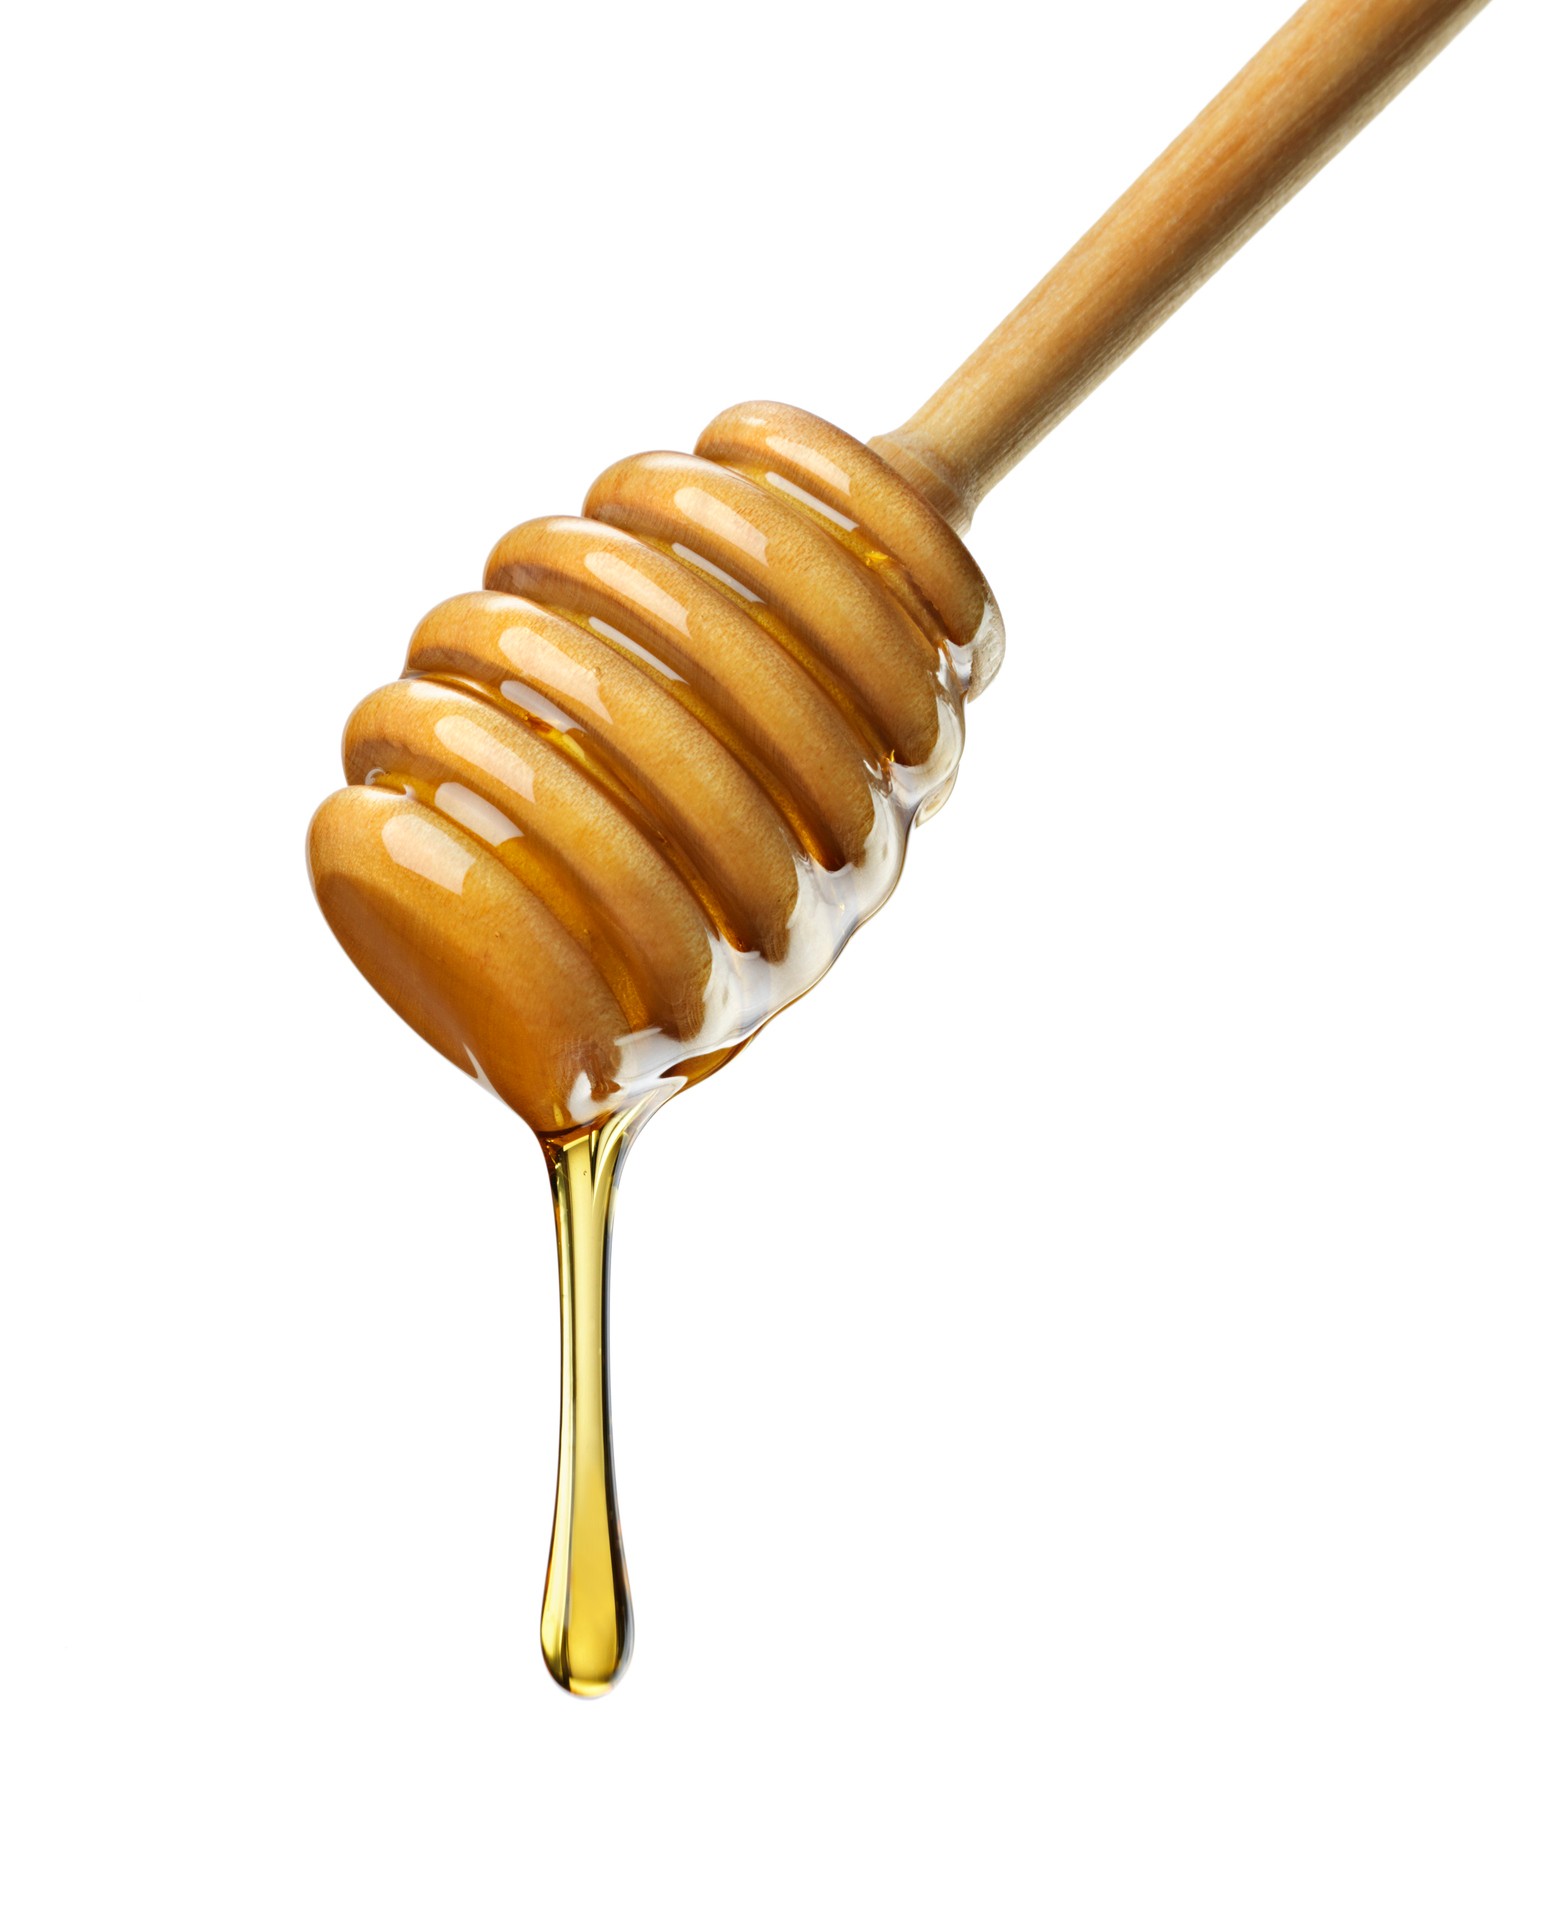 FDA Warns Some Honey Products Contain Erectile Dysfunction Drugs